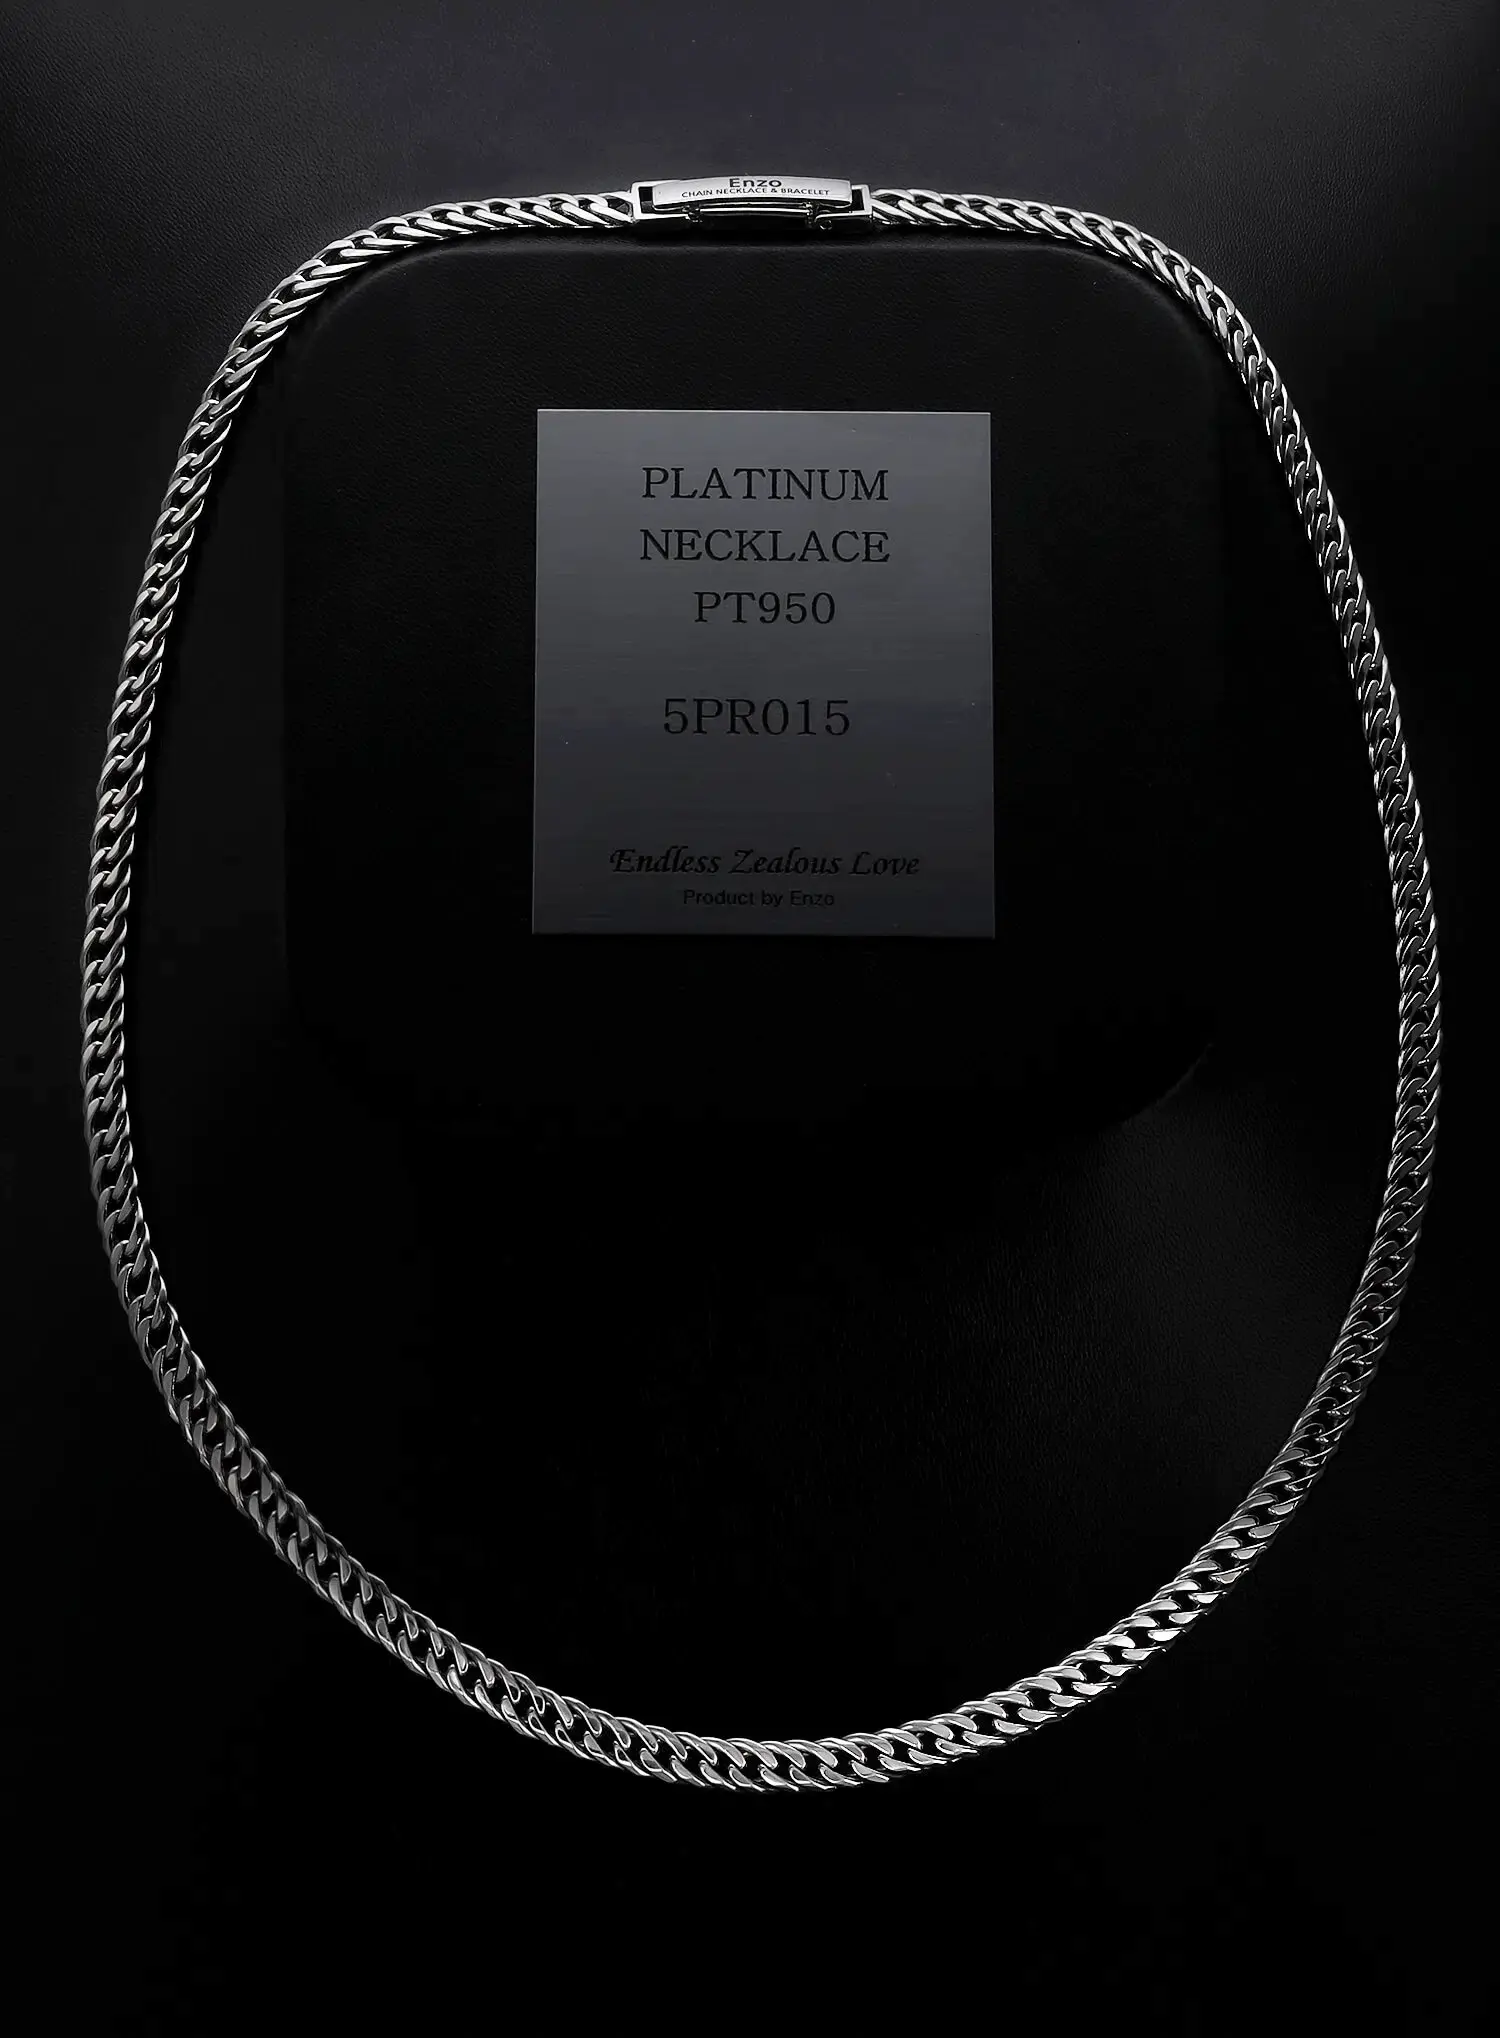 A 7mm men's platinum cuban chain necklace with engraving on the clasp in black background